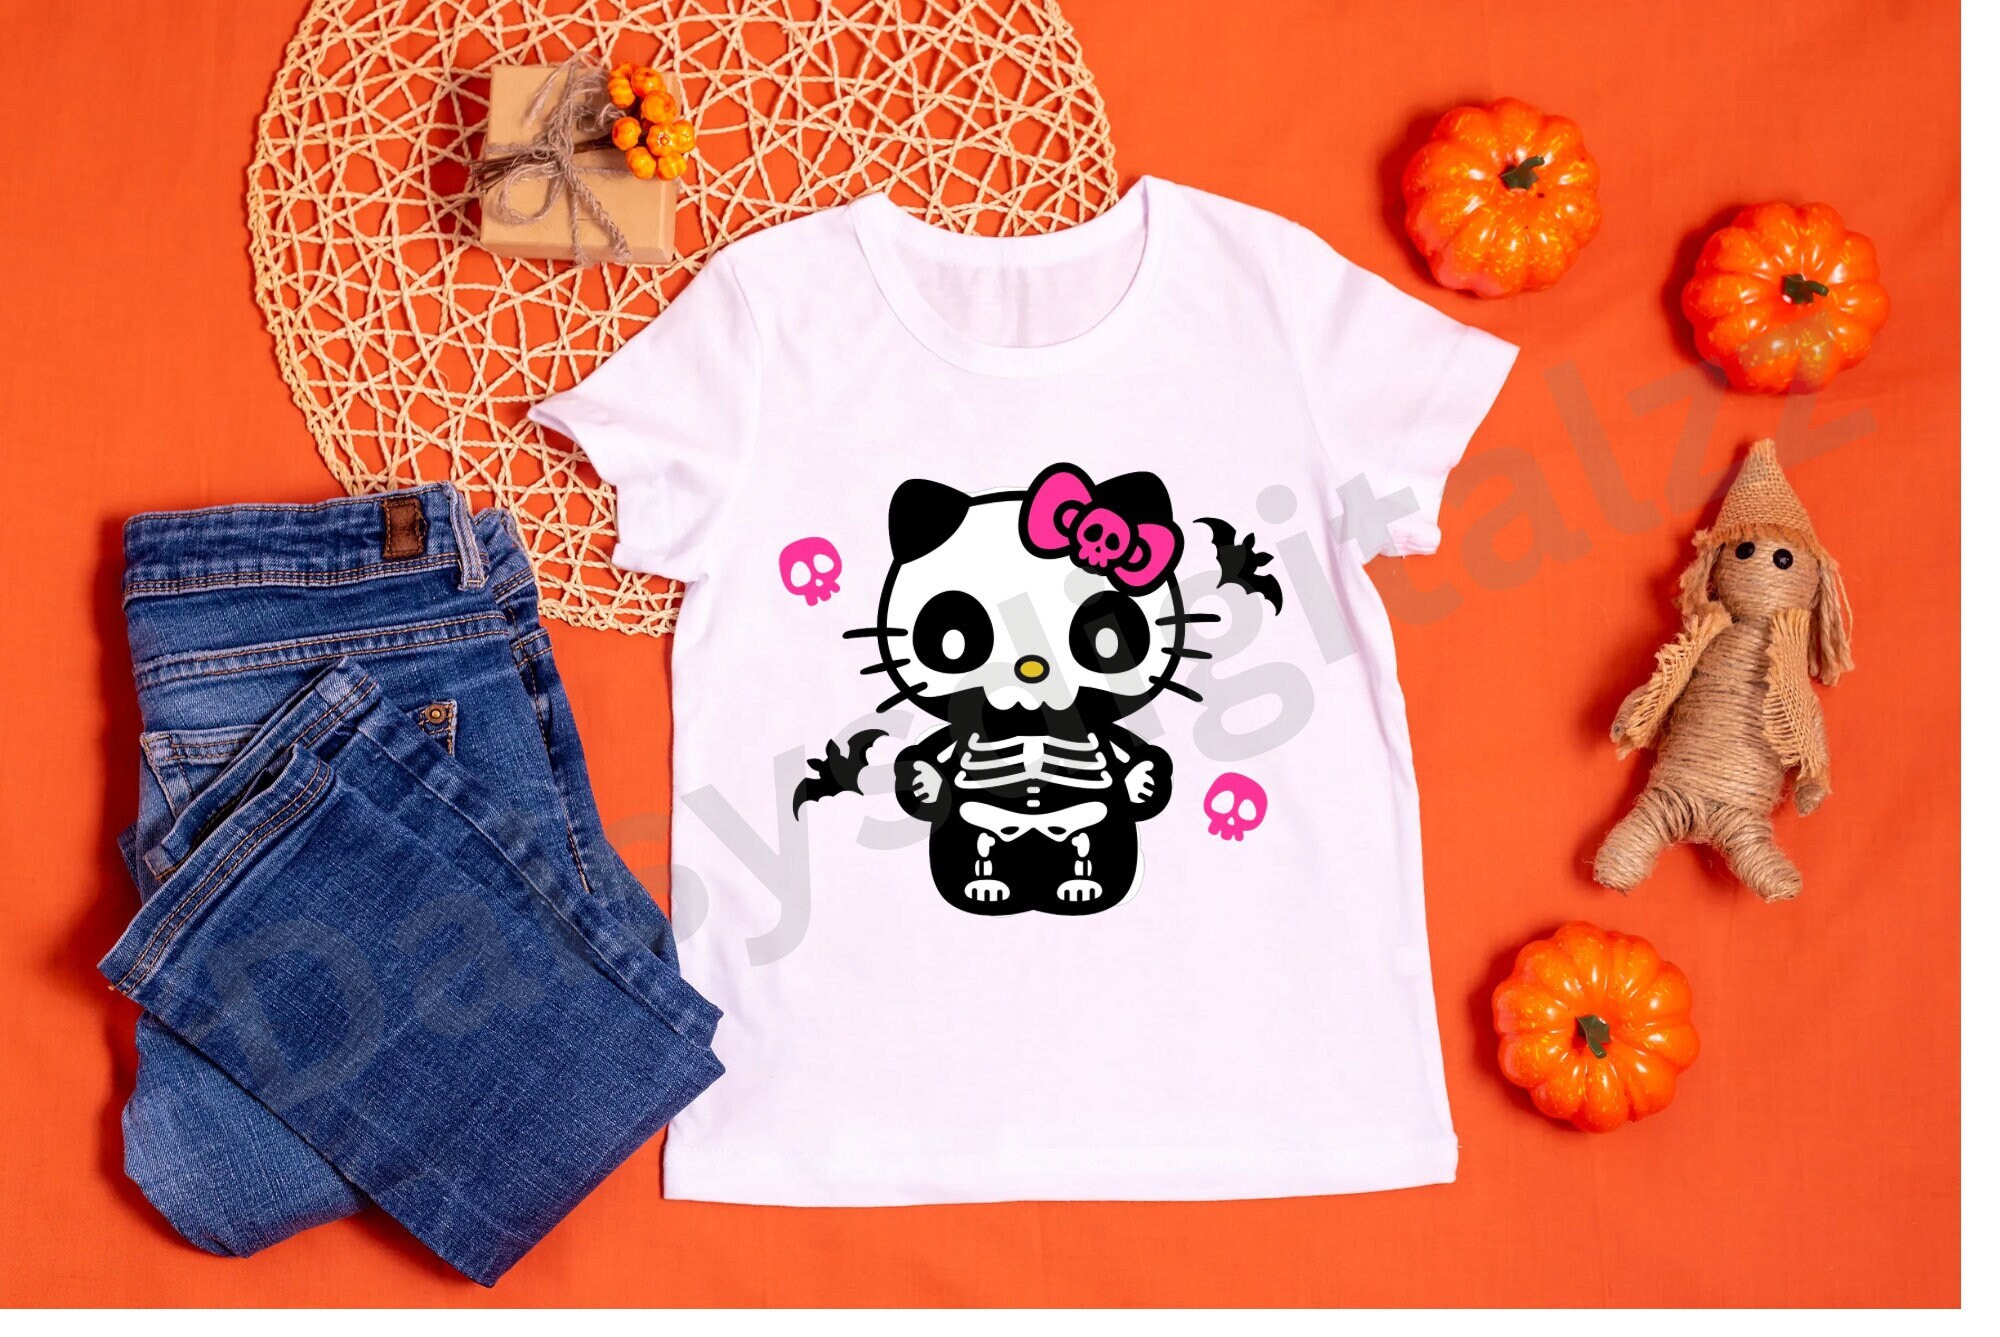 Hello kitty clothing and skulls ☠️☠️ #fyp #foryoupage #foryou